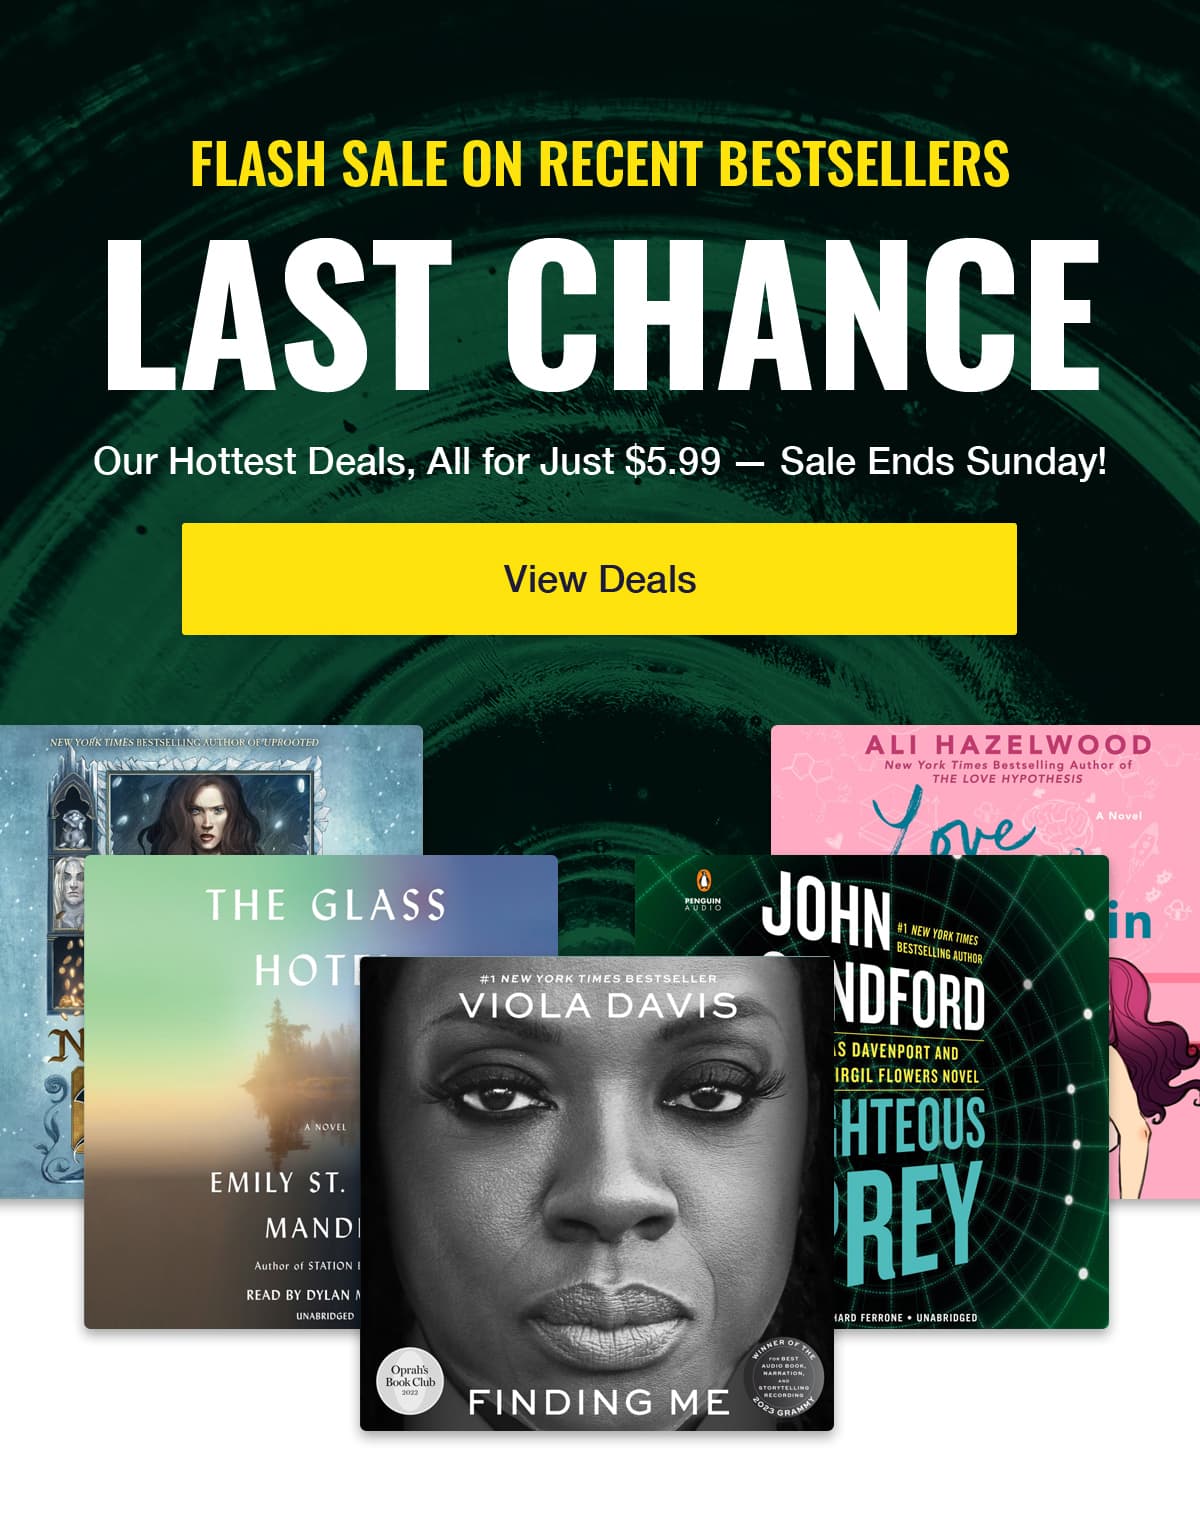 Last Chance: Flash Sale on Recent Bestsellers